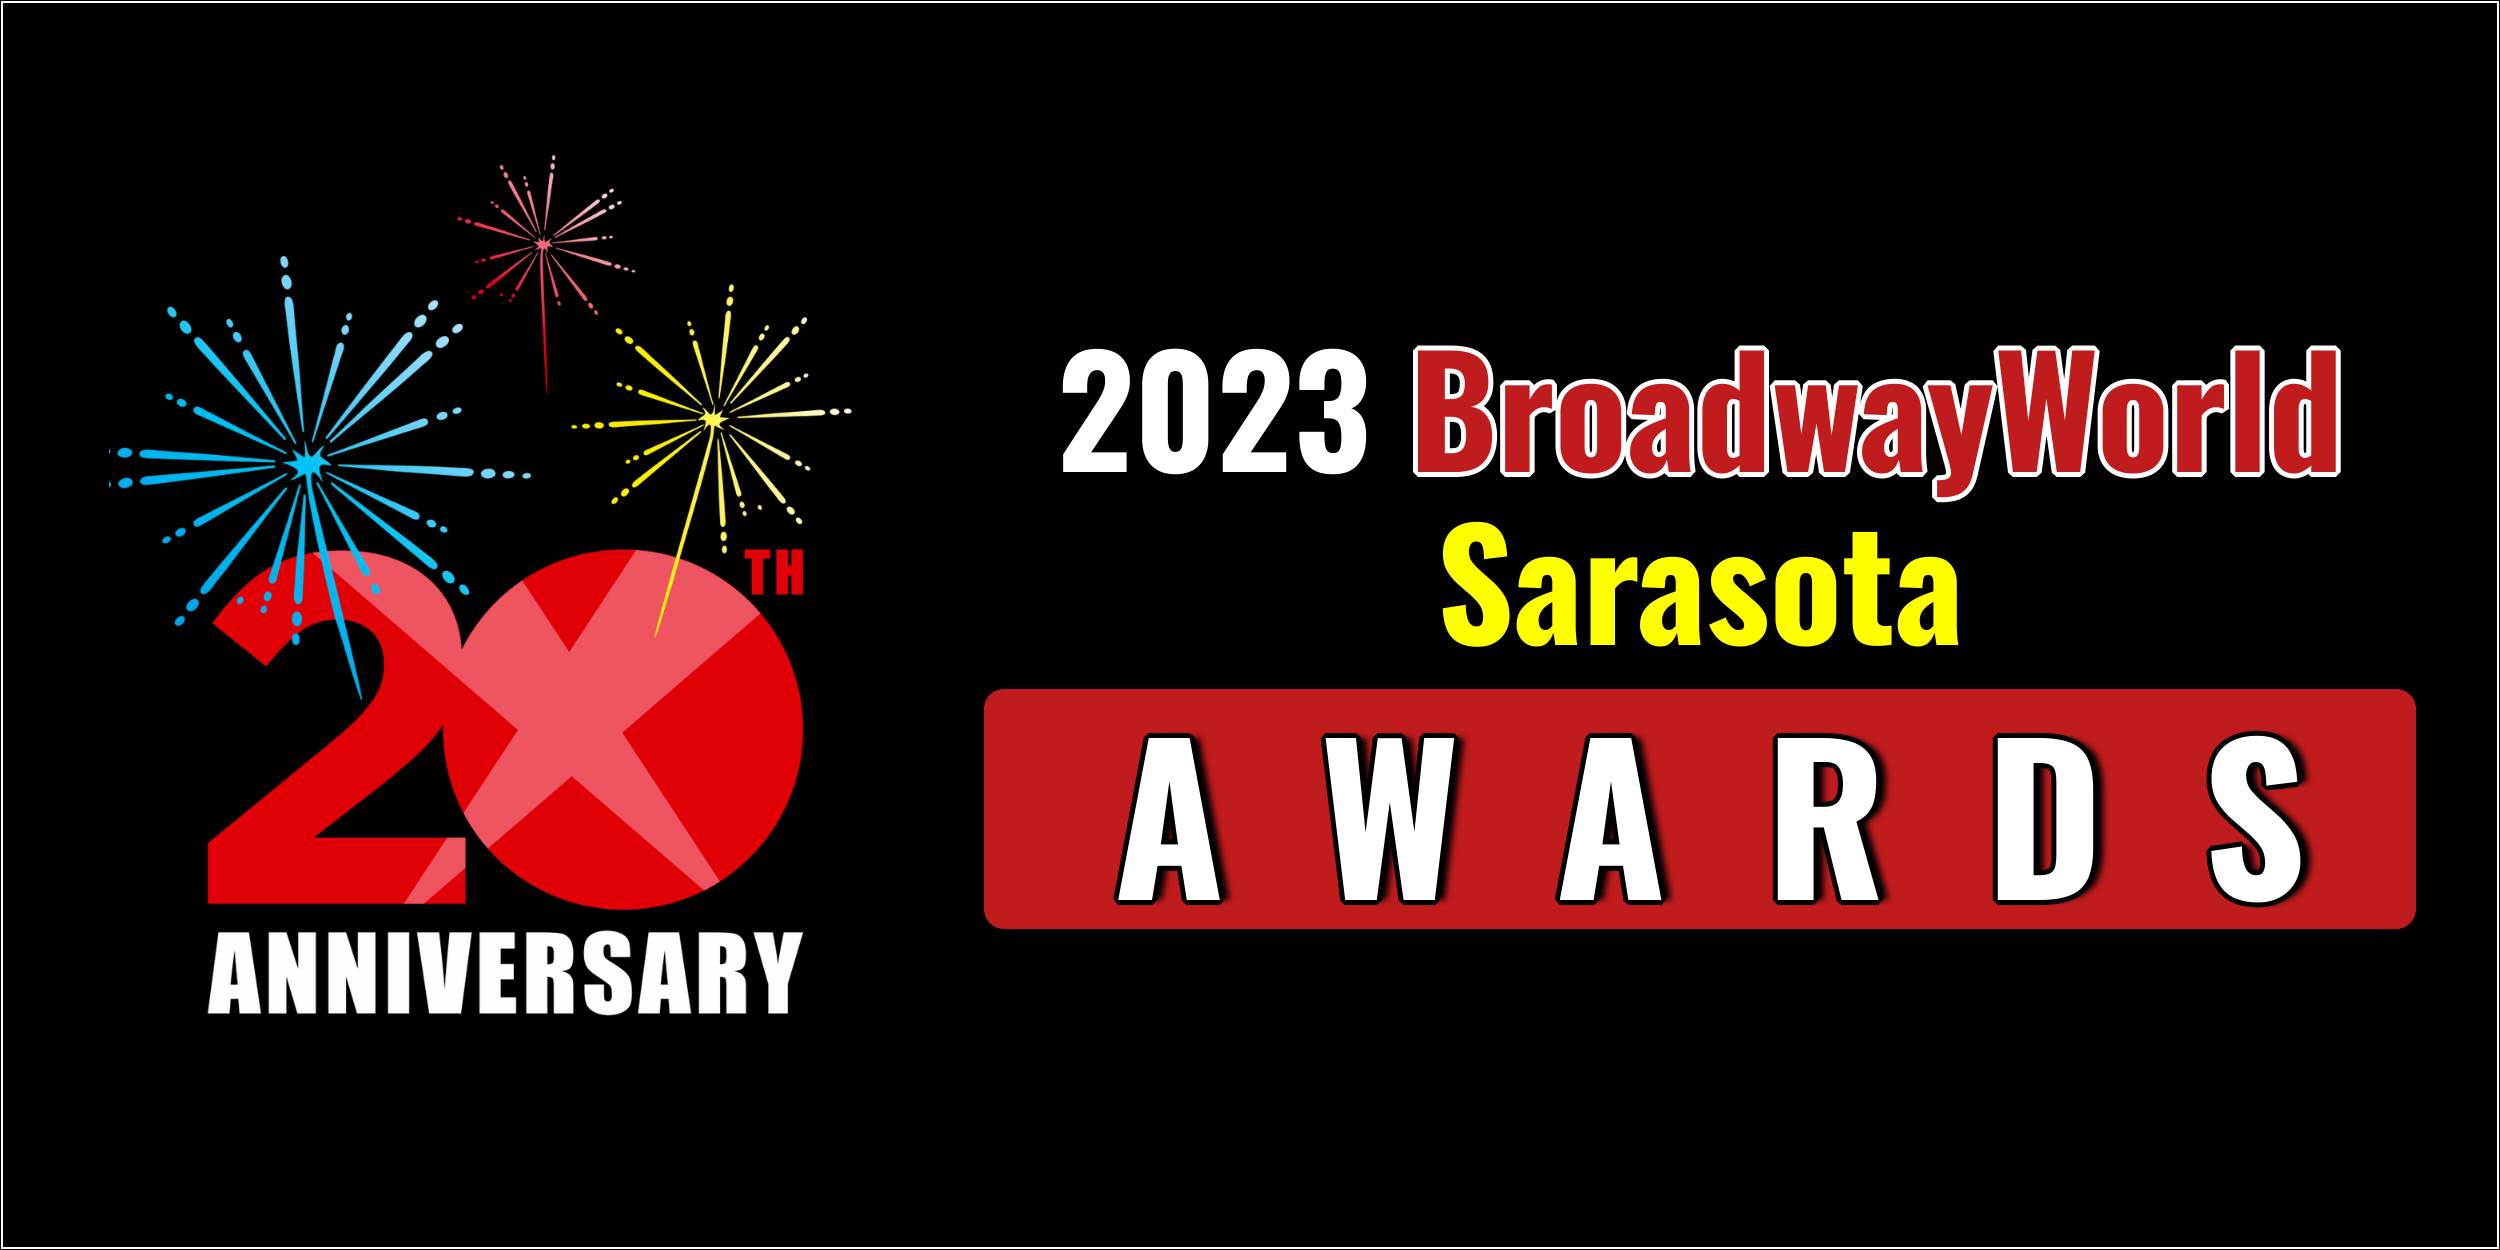 Latest Standings Announced For The 2023 BroadwayWorld Sarasota Awards; FLYIN' WEST Leads Best Play! 